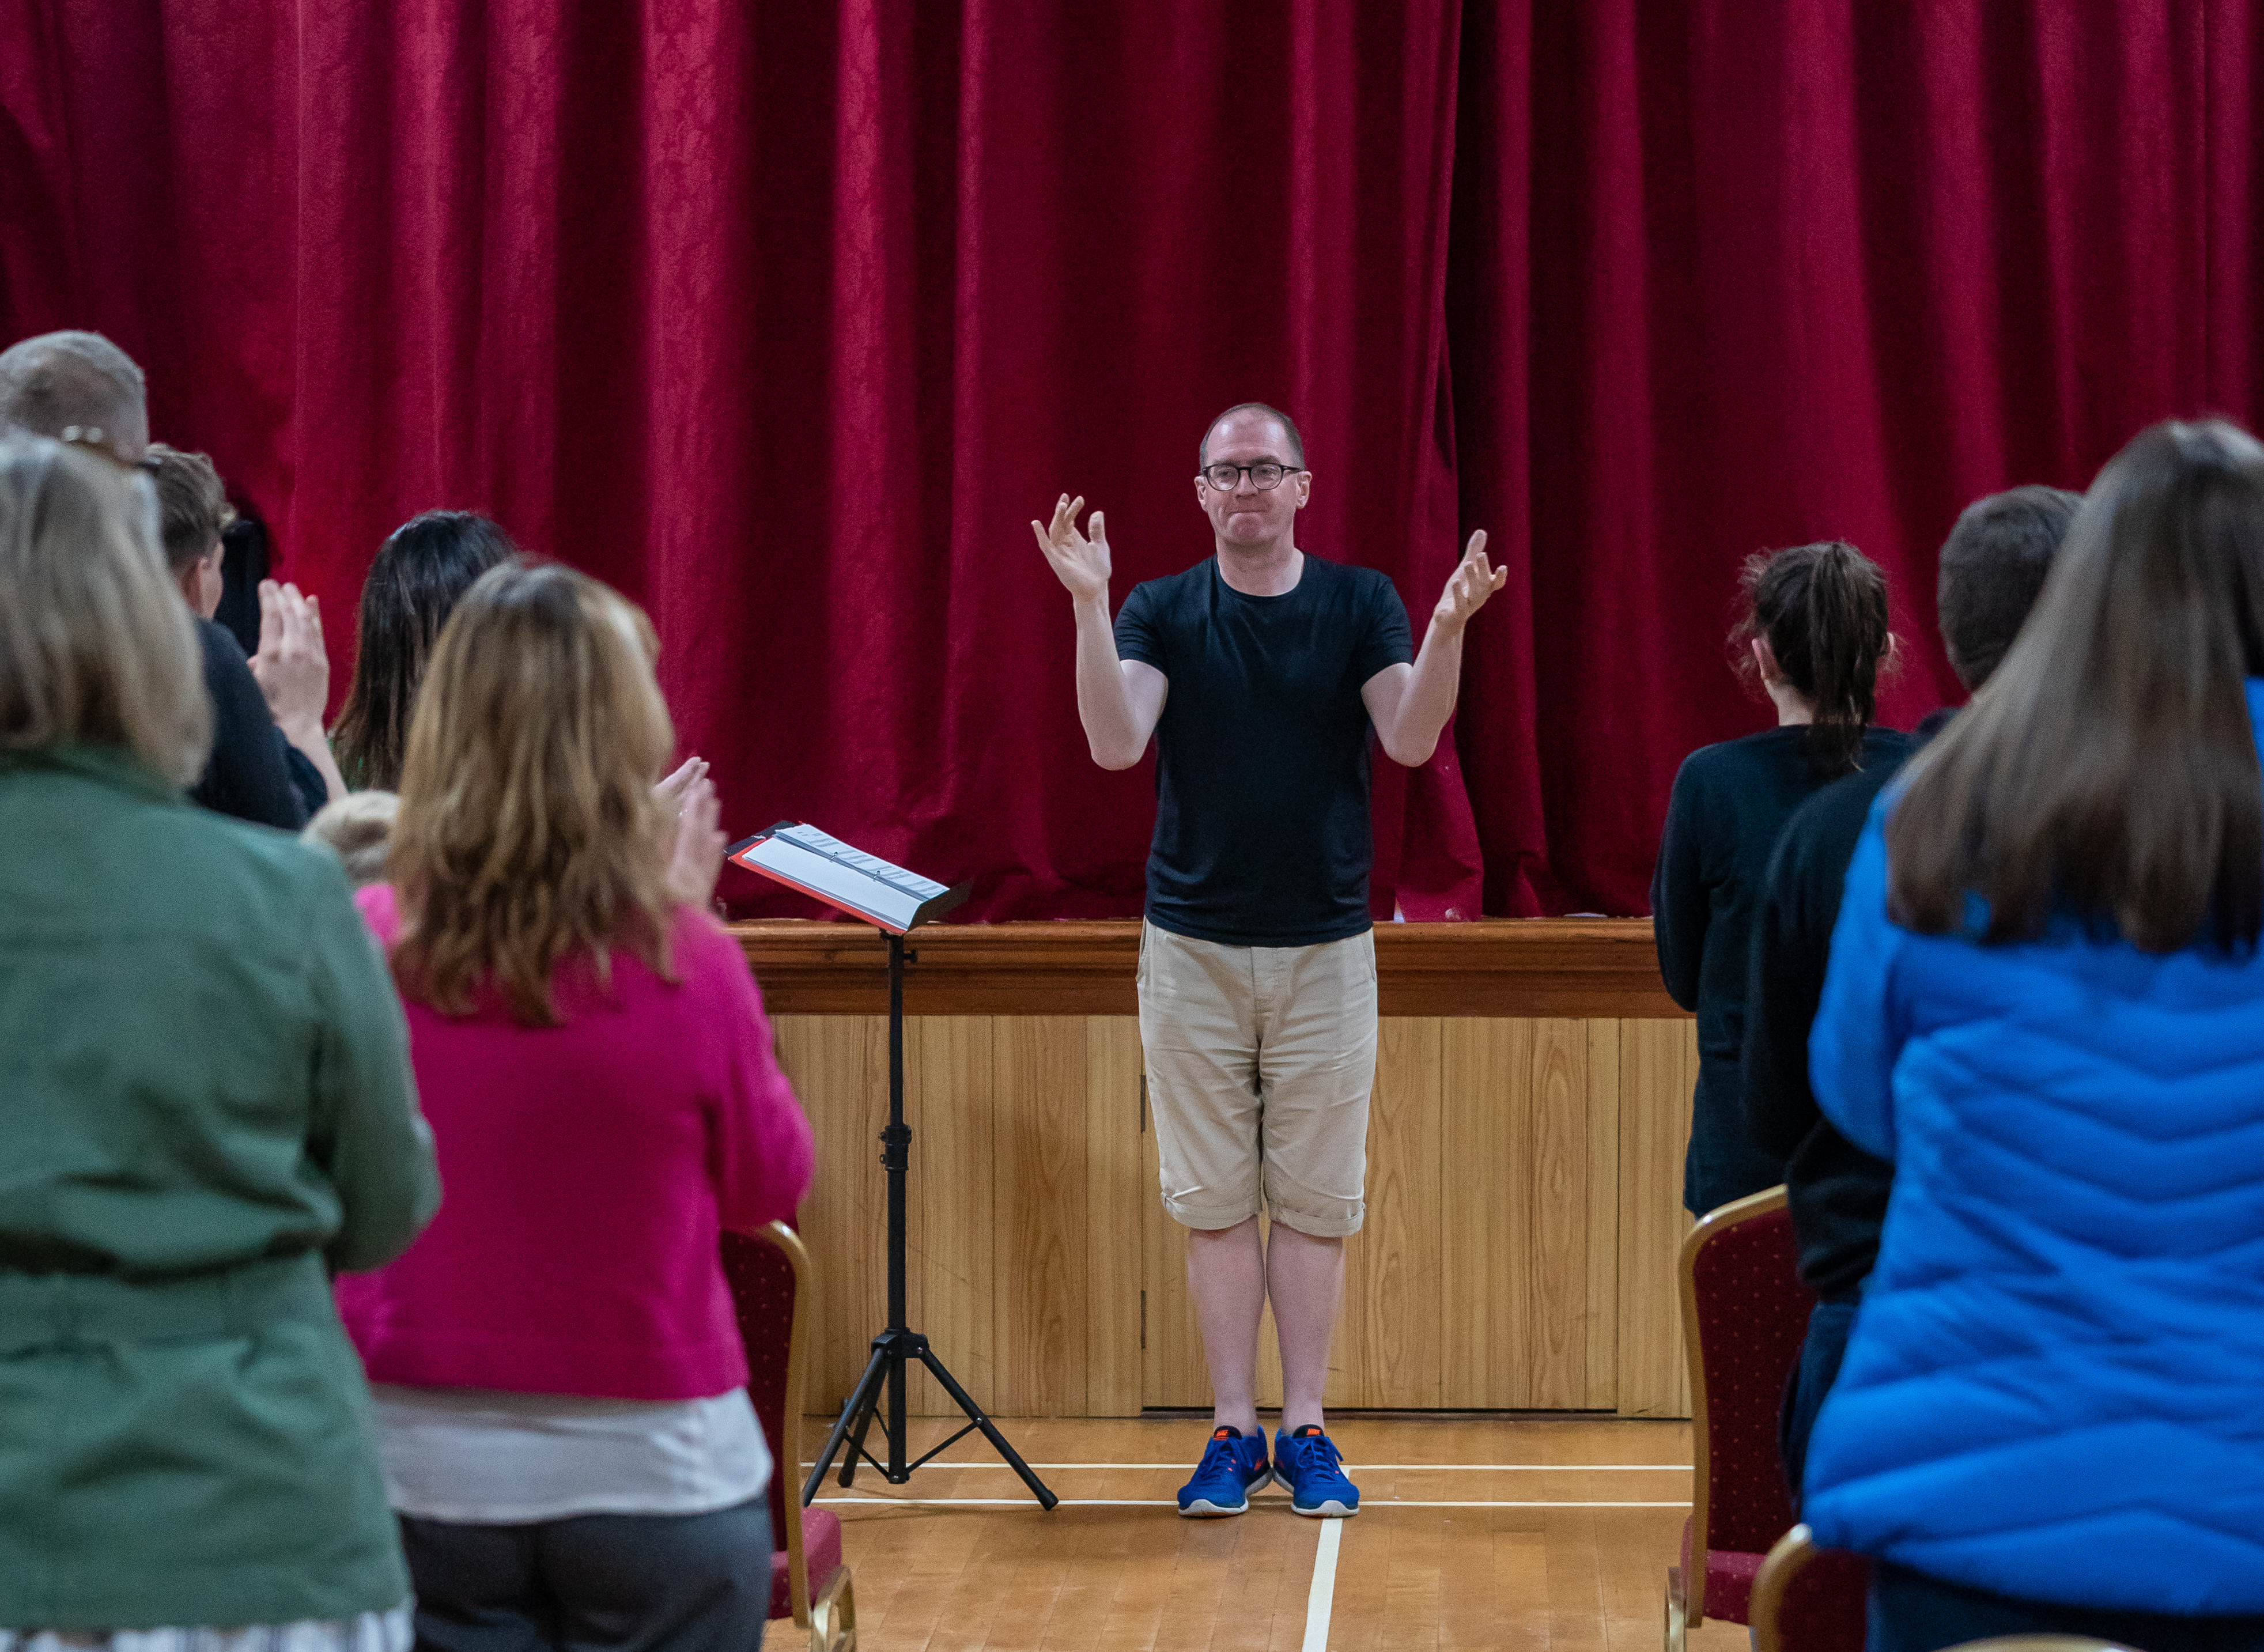 Dr Paul Whittaker, CBE takes a learn to sing in sign language workshop.